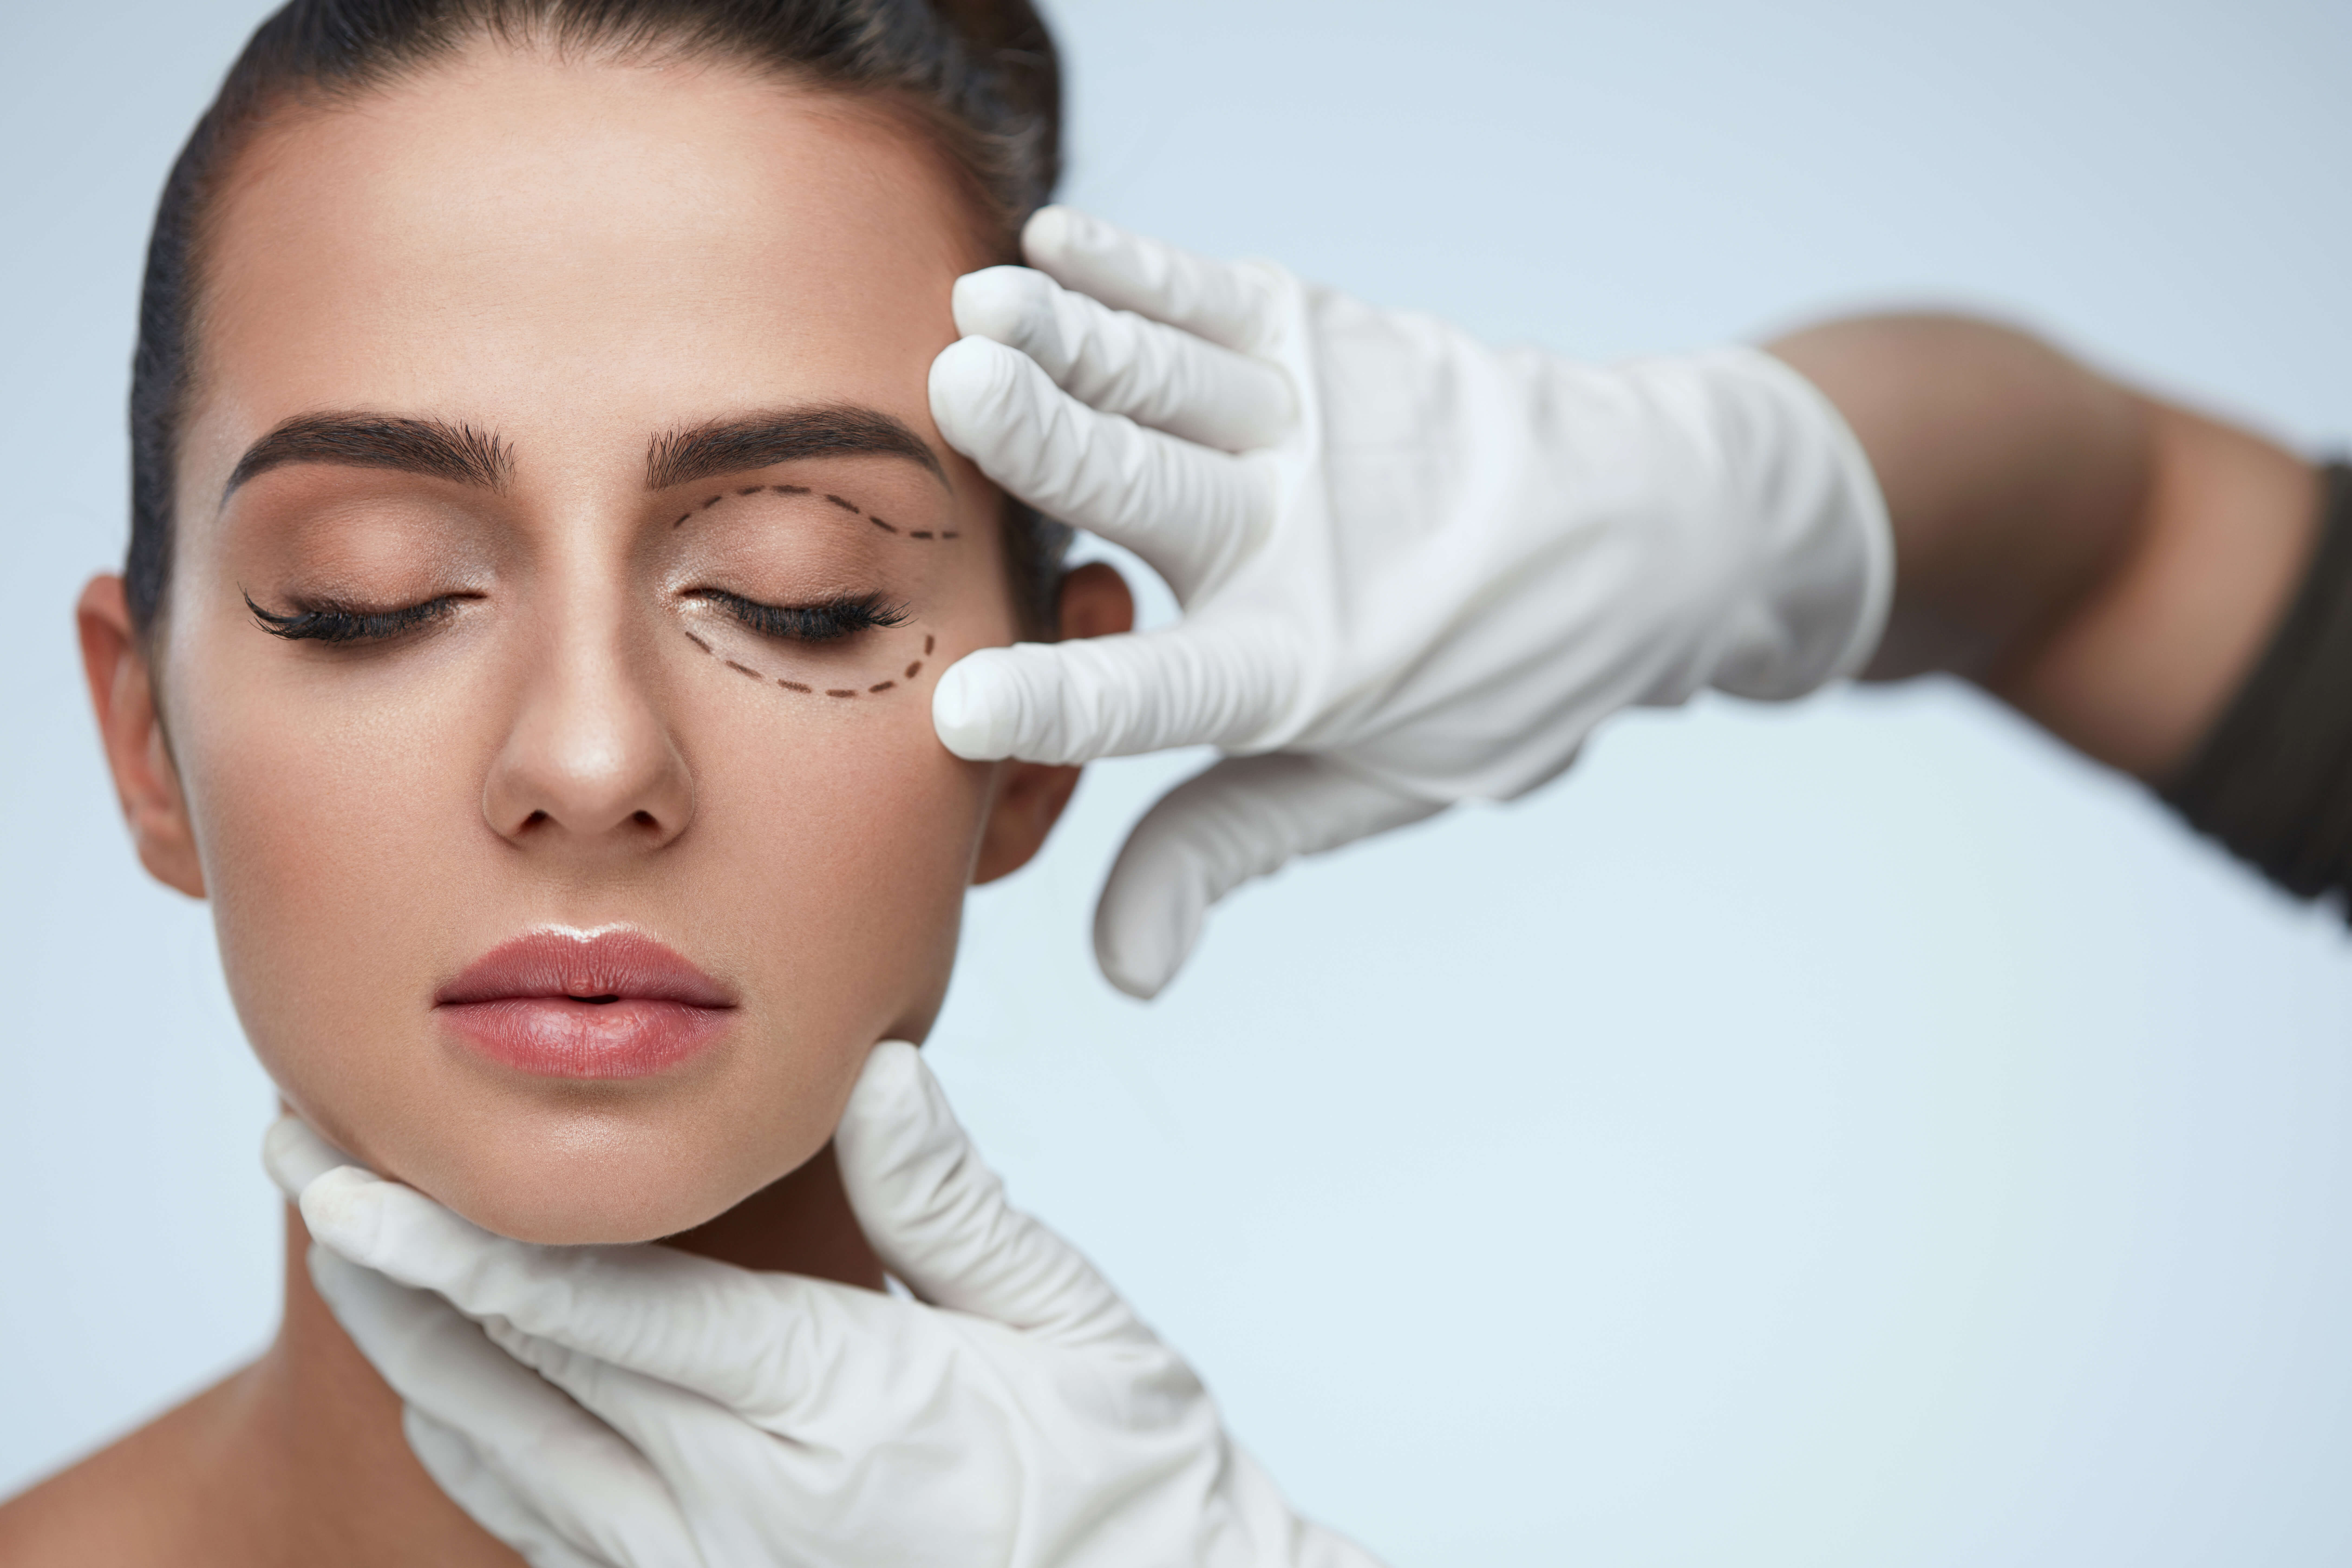 Surgical vs Non-Surgical Lower Eyelid Treatments